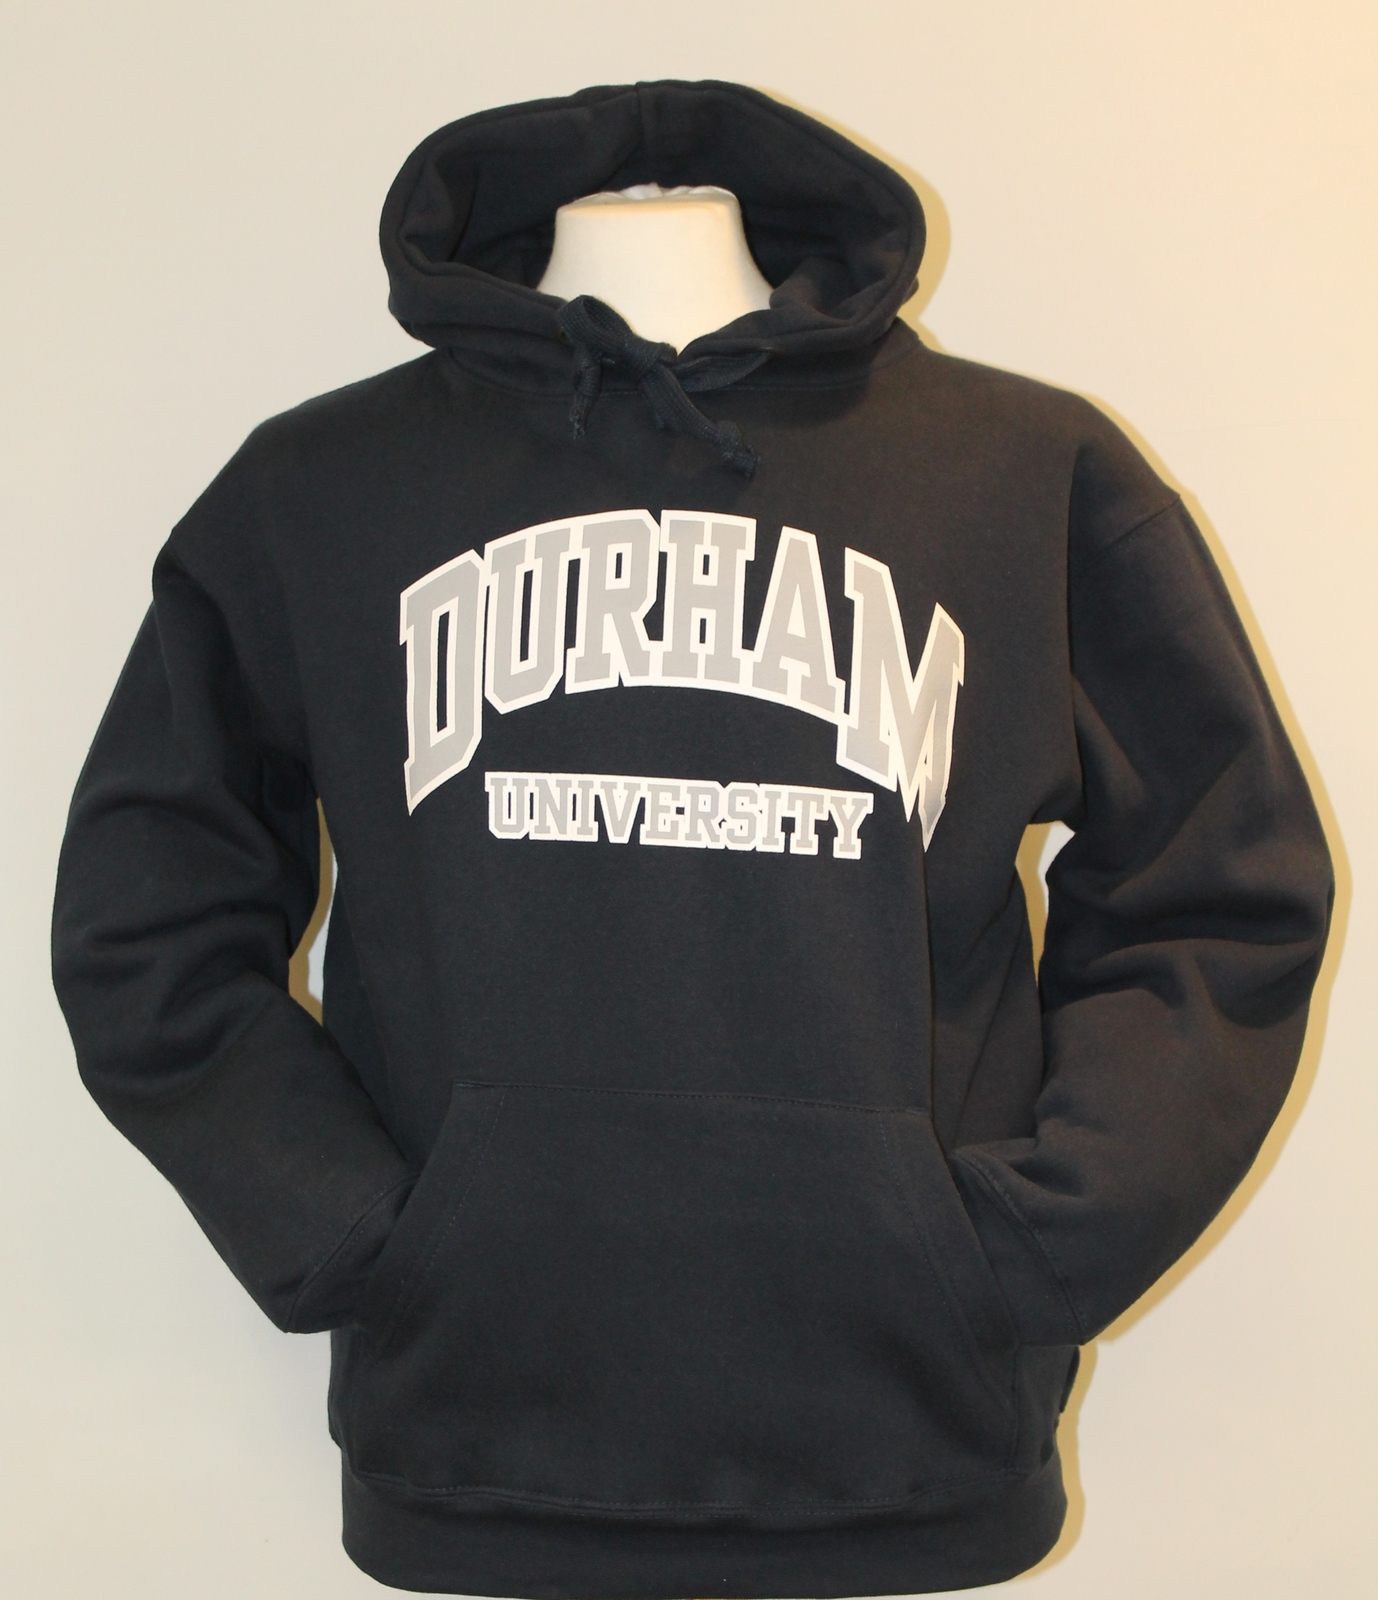 2018-2019 Freshers Pack at Durham University Official Shop